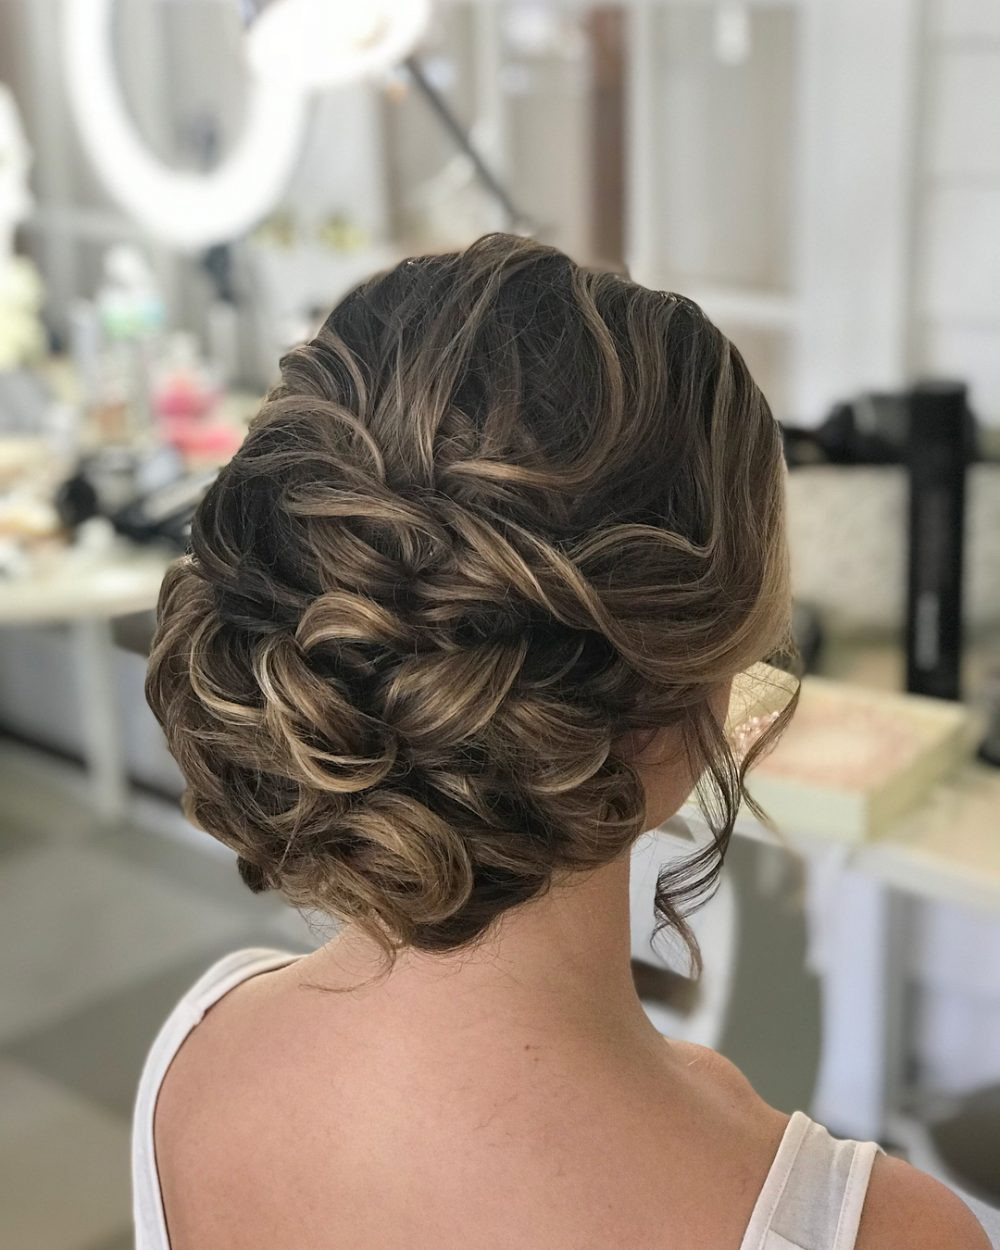 How To Do Wedding Hairstyles Updos
 17 Gorgeous Wedding Updos for Every Type of Bride